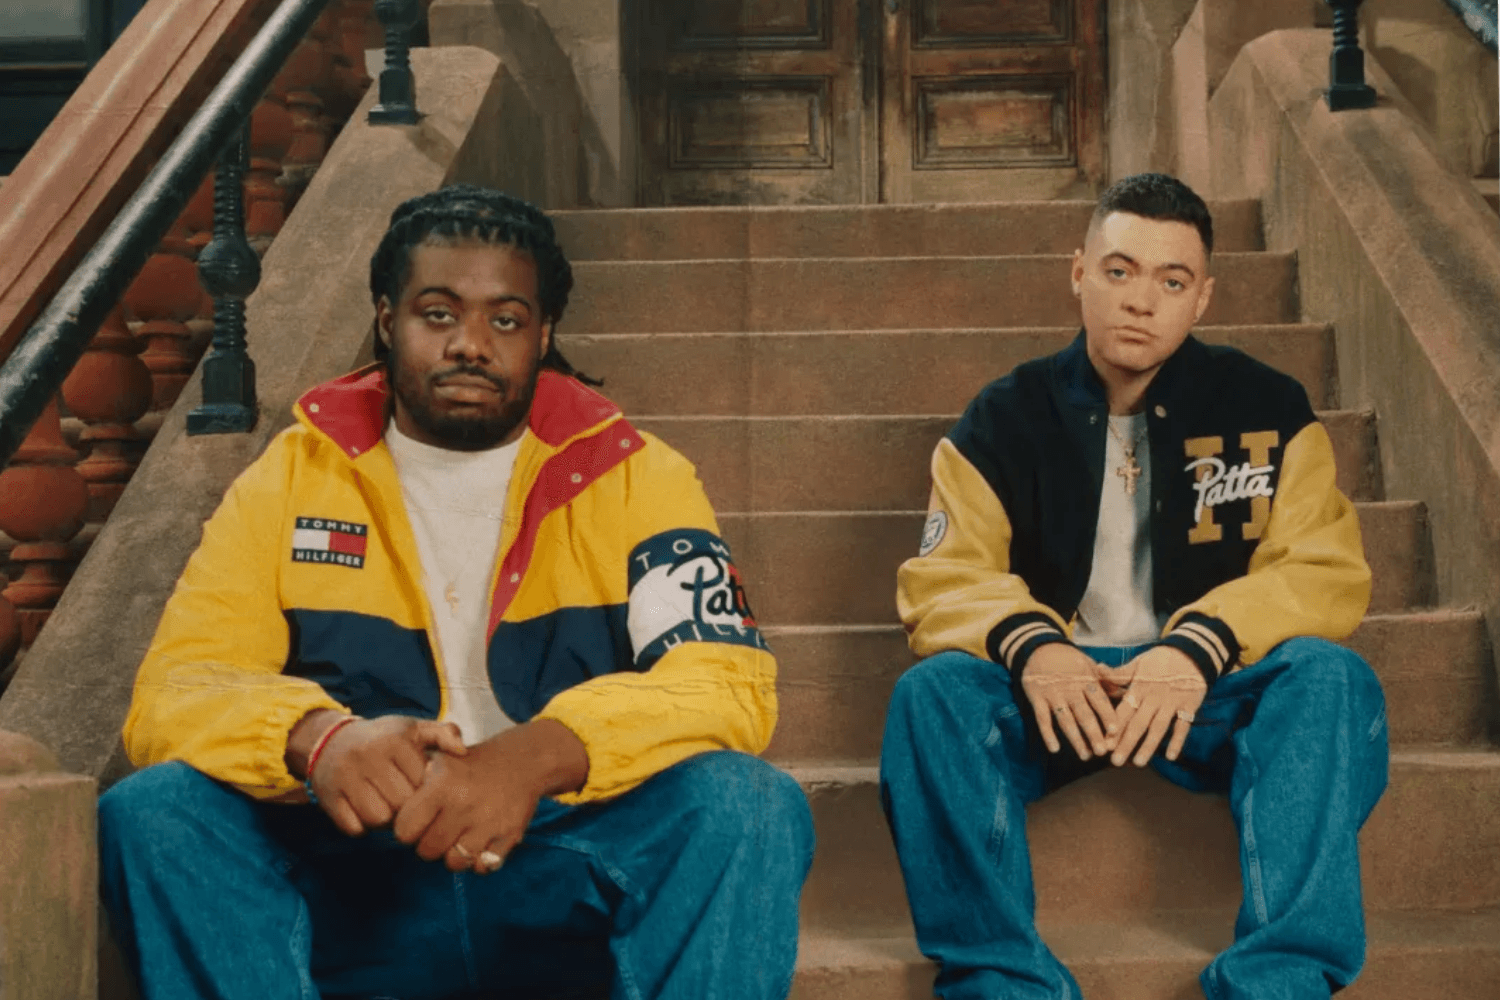 The Patta x Tommy collab pays tribute to hip-hop culture